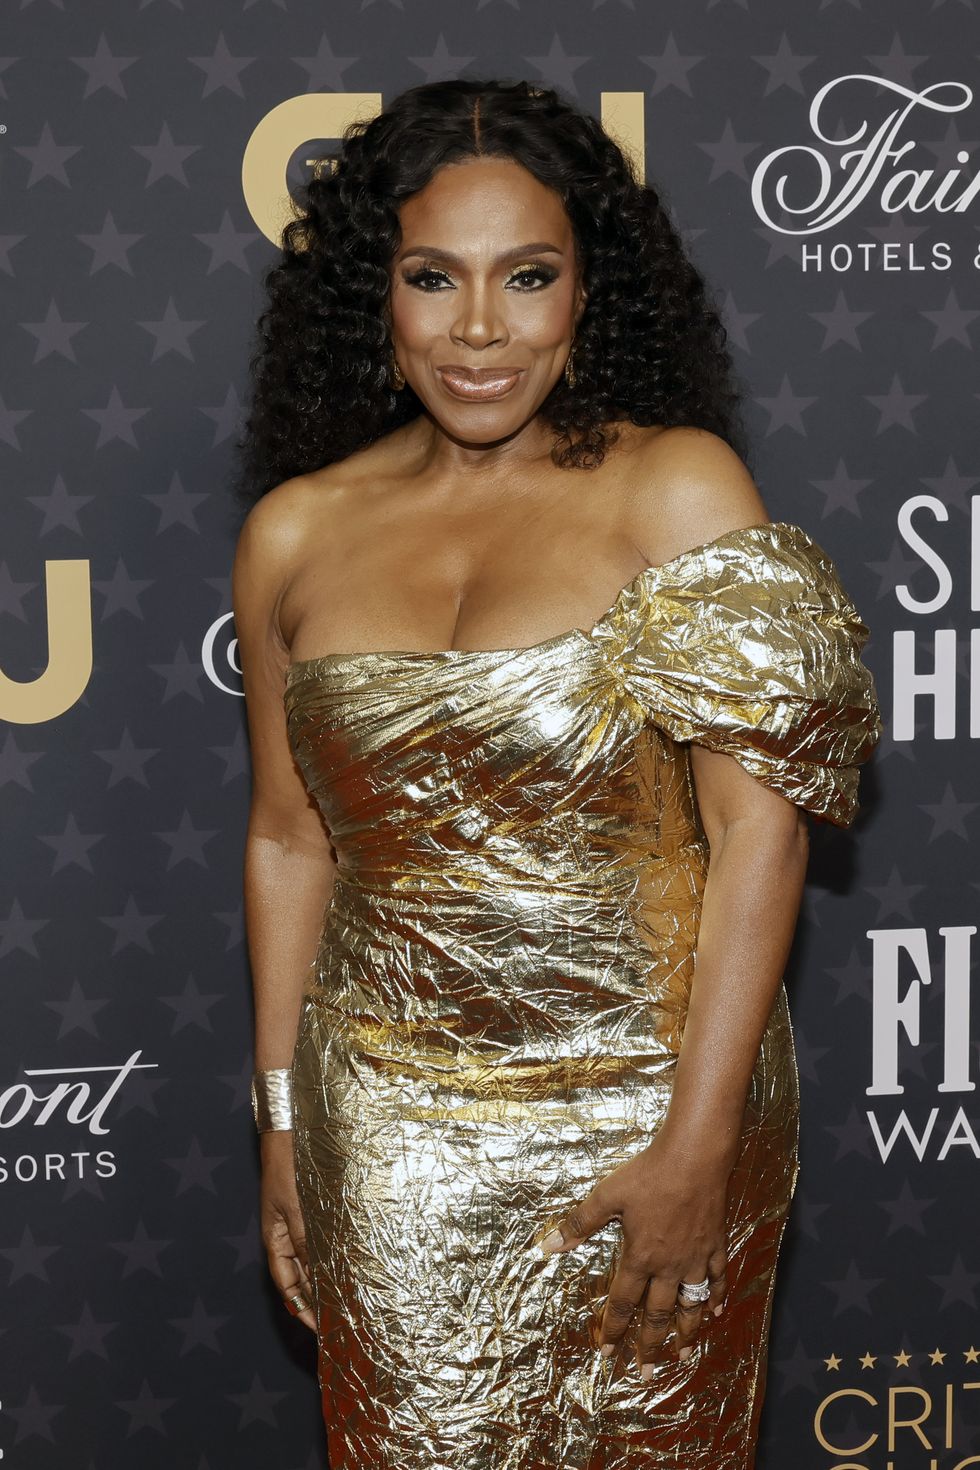 The Top 10 Most Stylish Black Female Celebrities In 2021